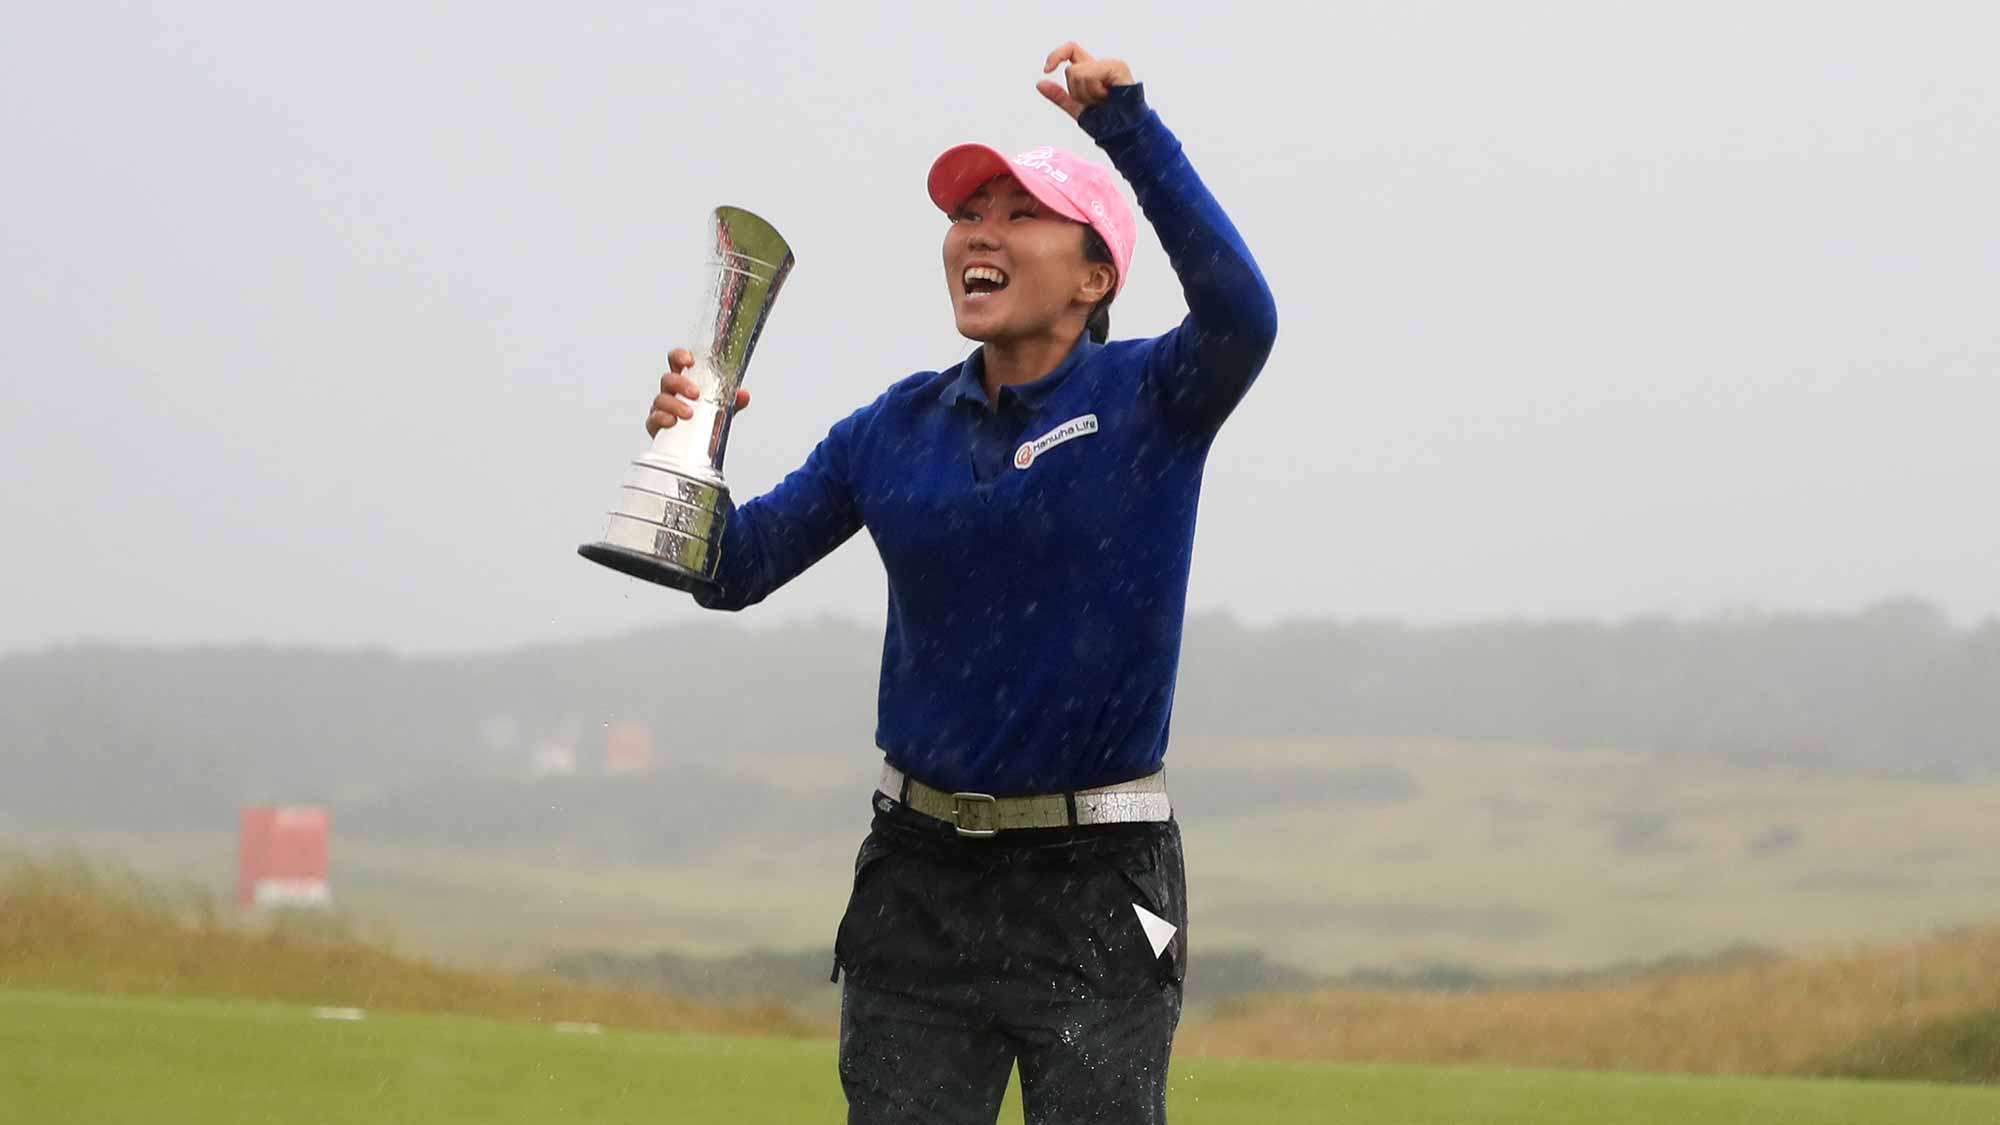 In-Kyung Kim of Korea celebrates with the trophy following her victory during the final round of the Ricoh Women's British Open at Kingsbarns Golf Links 